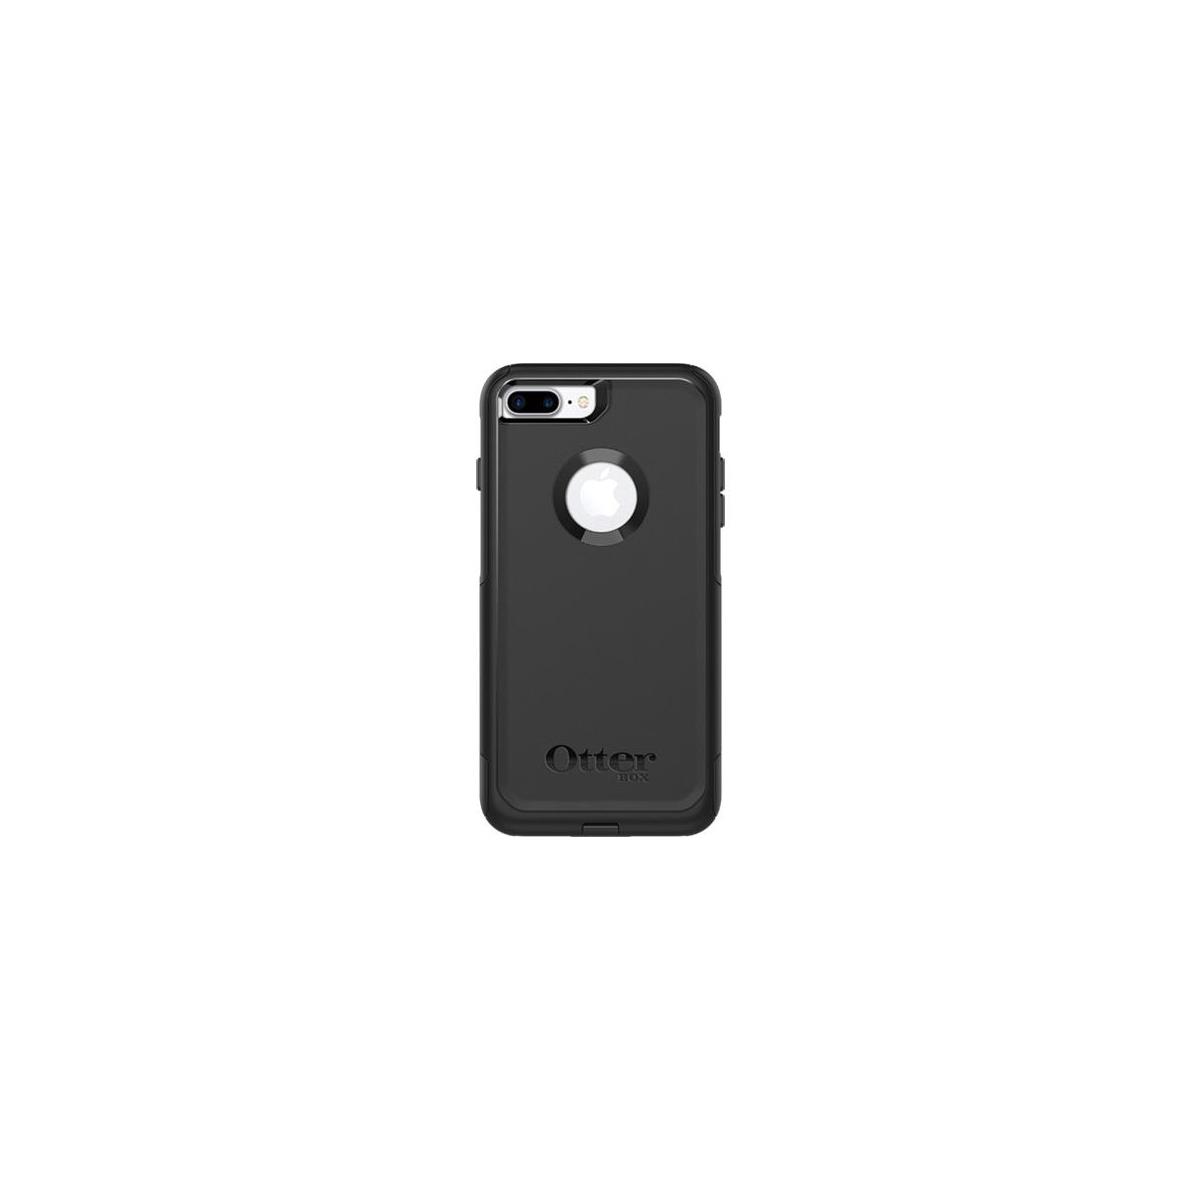 Image of OtterBox Otterbox Commuter Case for iPhone 8 Plus